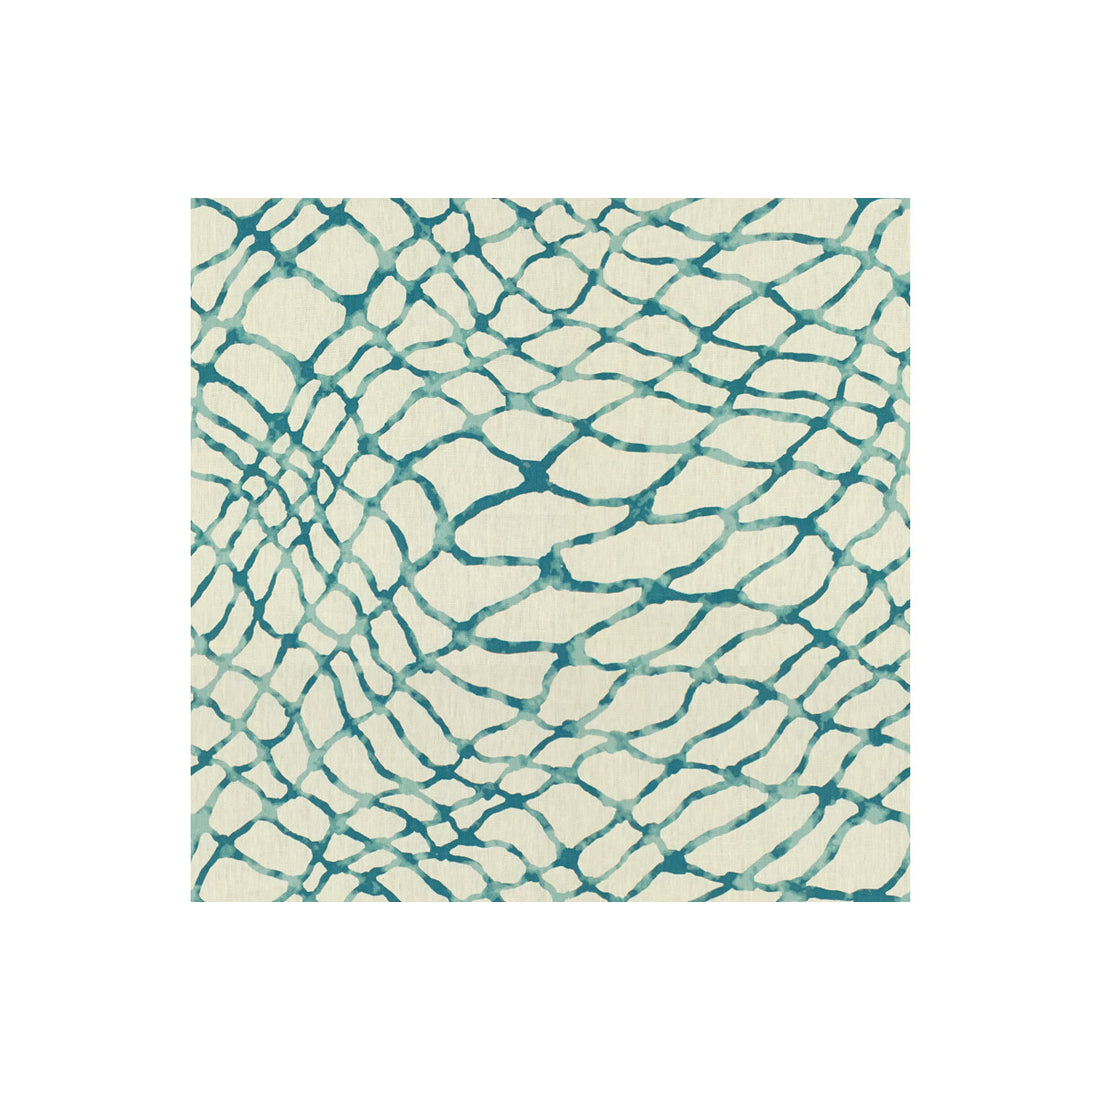 Waterpolo fabric in lagoon color - pattern WATERPOLO.13.0 - by Kravet Basics in the Jeffrey Alan Marks Waterside collection